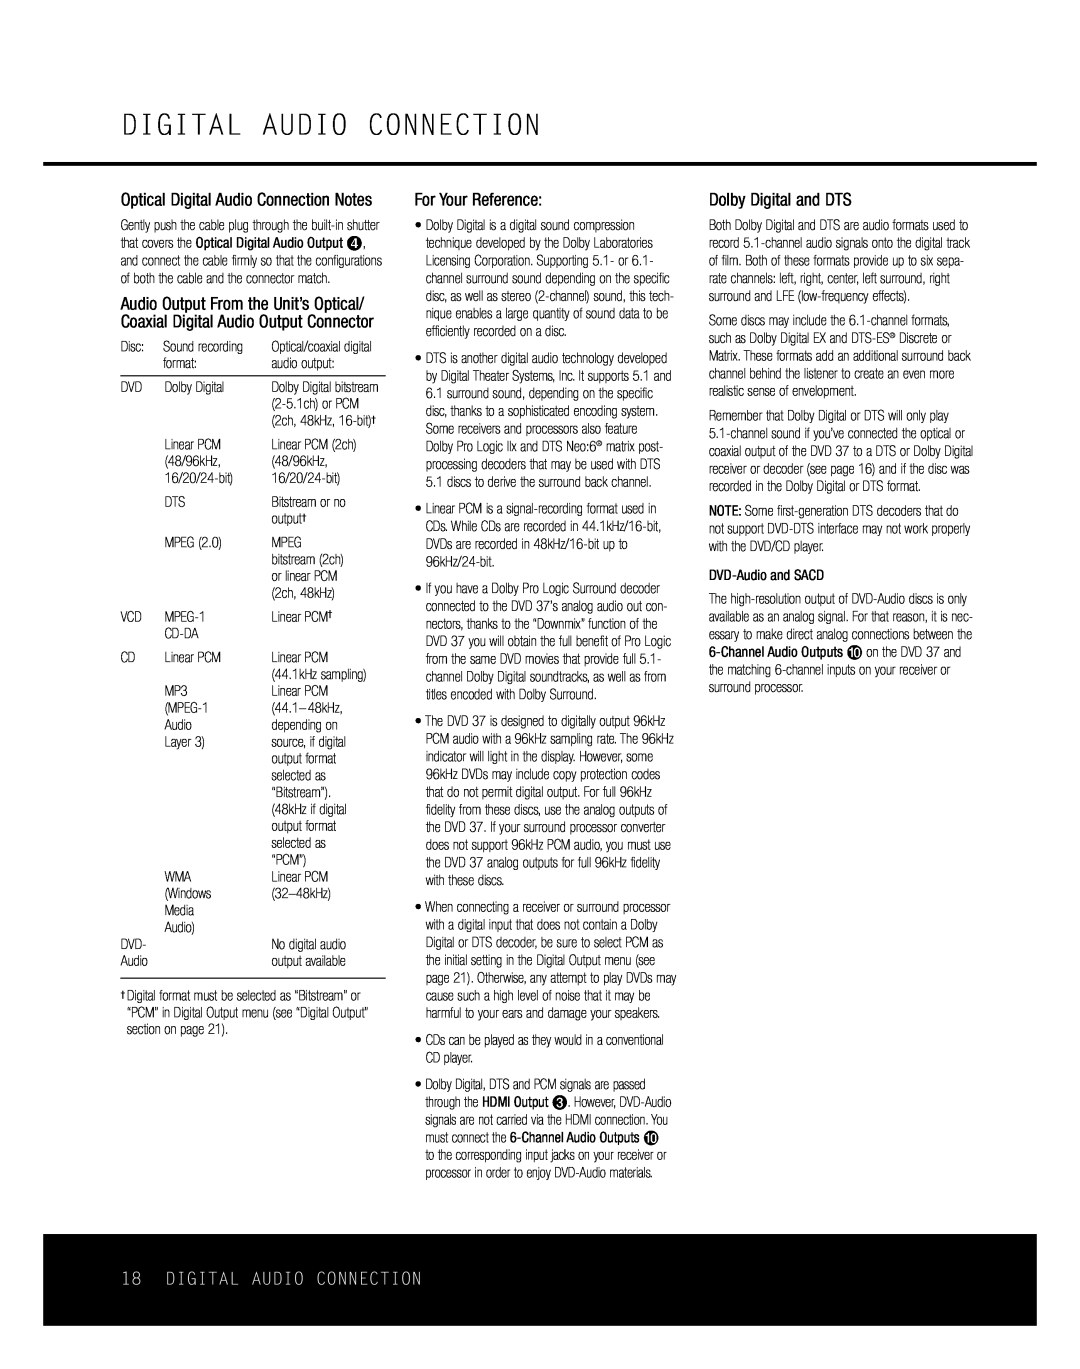 Harman-Kardon DVD 37 owner manual Digital Audio Connection, For Your Reference, Dolby Digital and DTS 